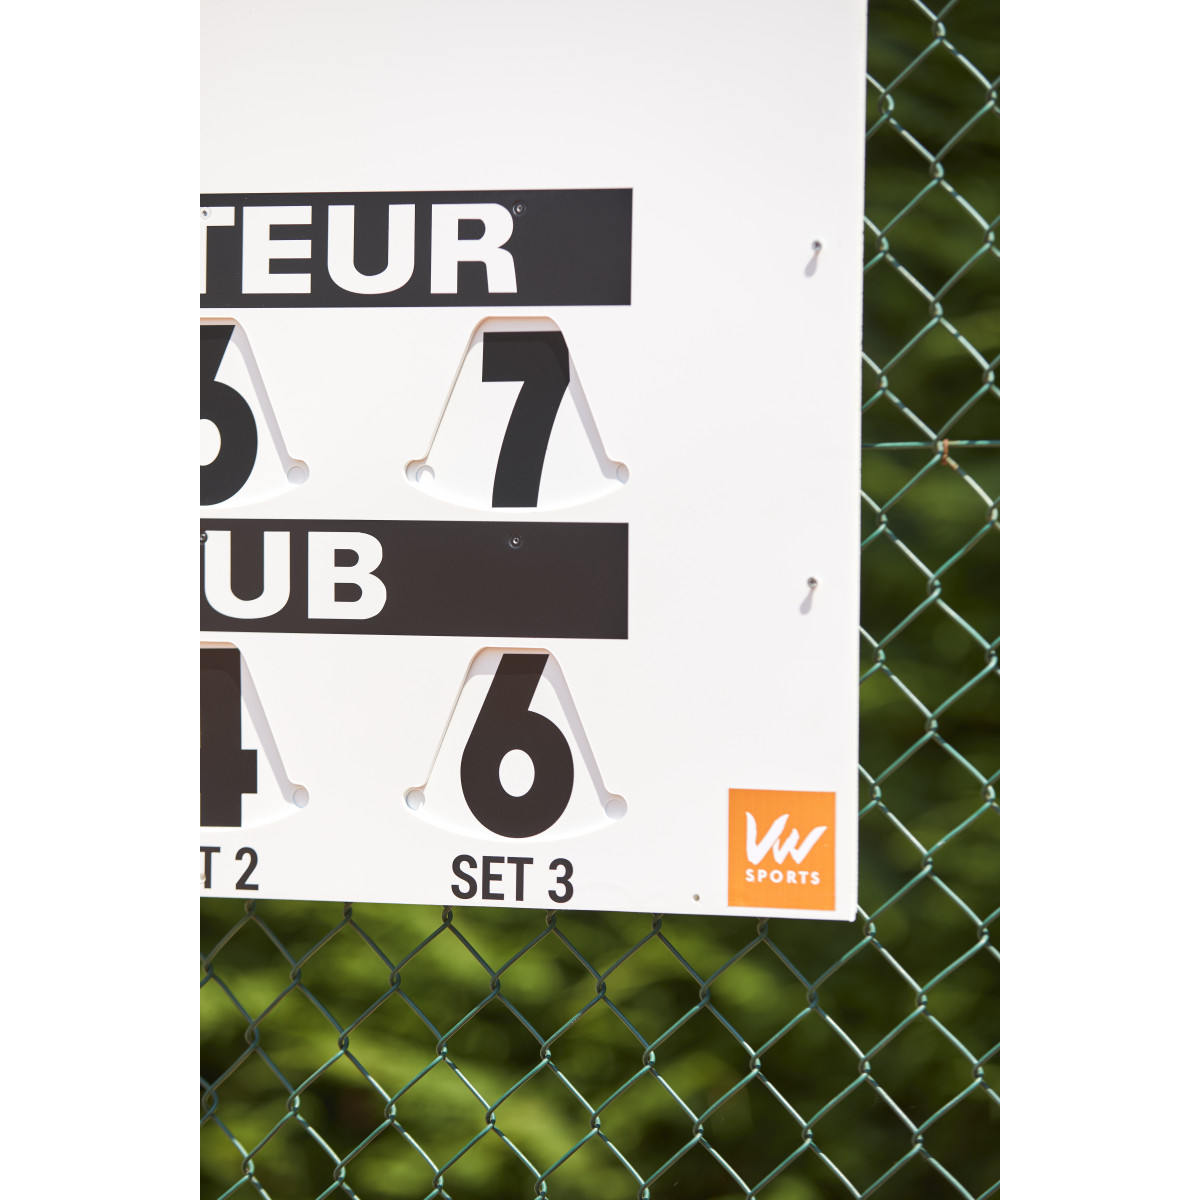 Marqueur score VW SPORTS M 80 x 60cm Made in France - 150520